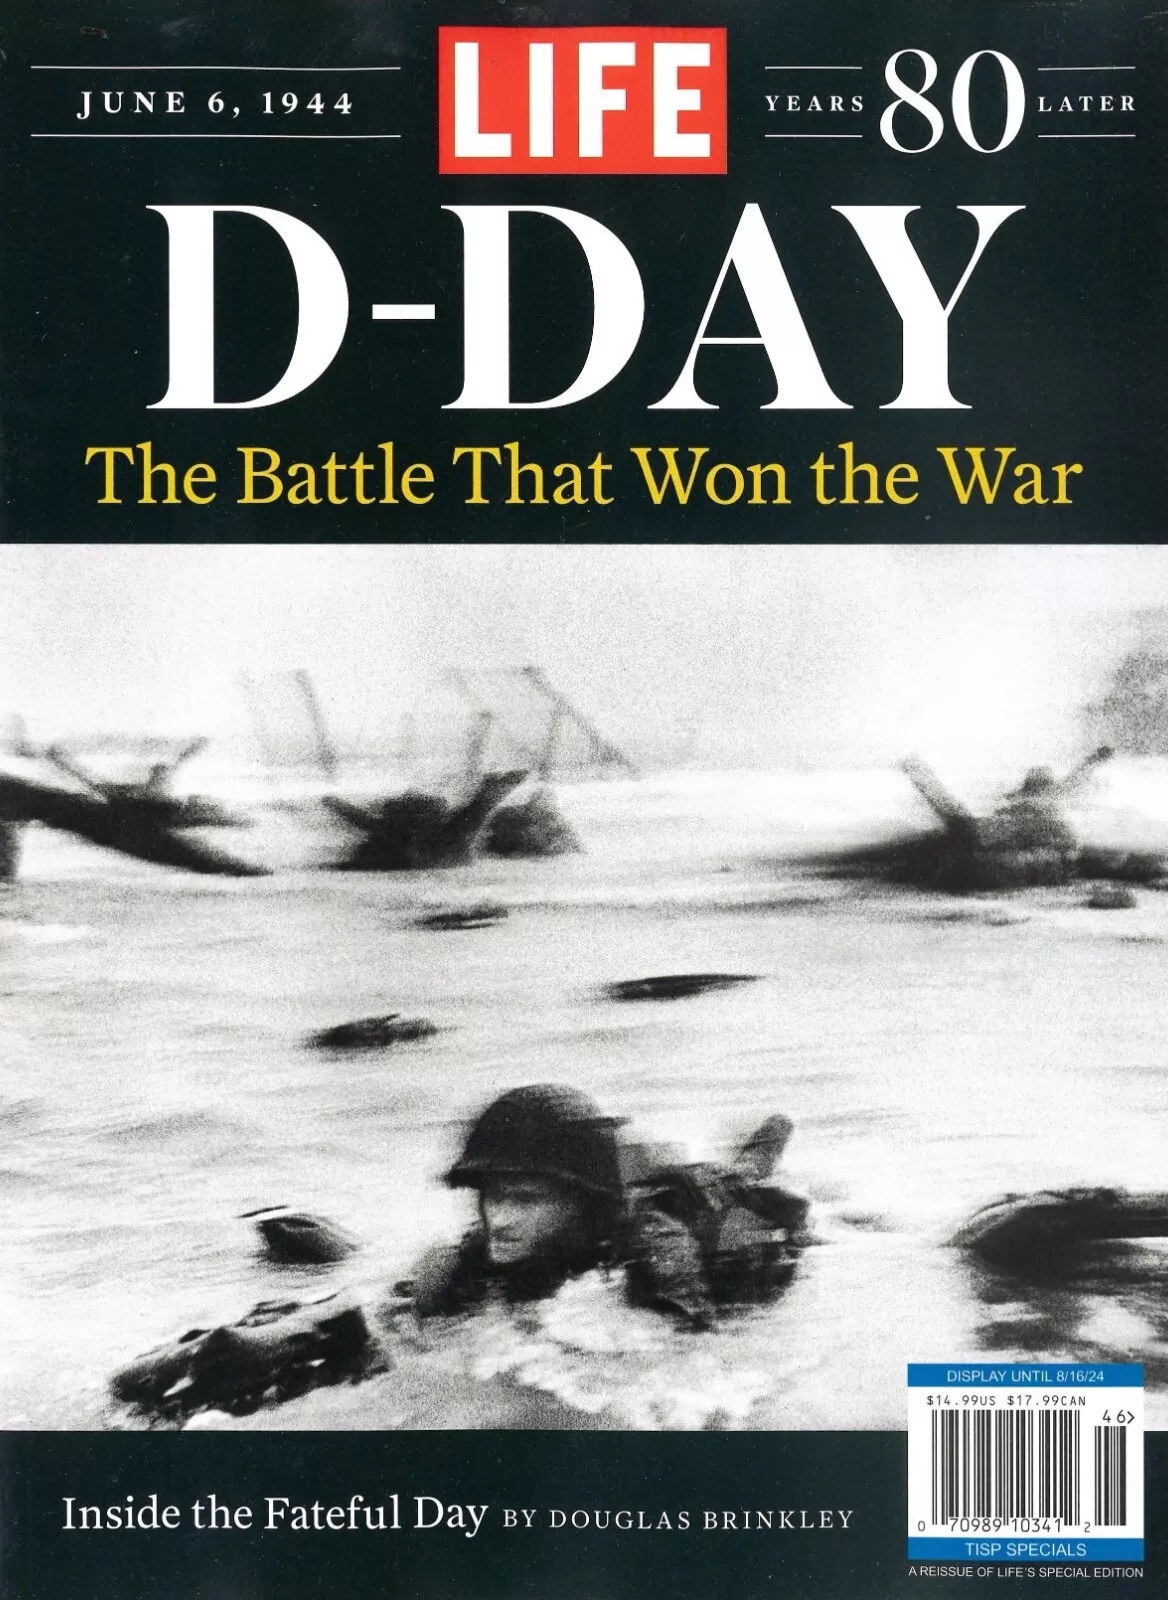 LIFE Magazine, D-DAY, 80 Years Later (2024), cover